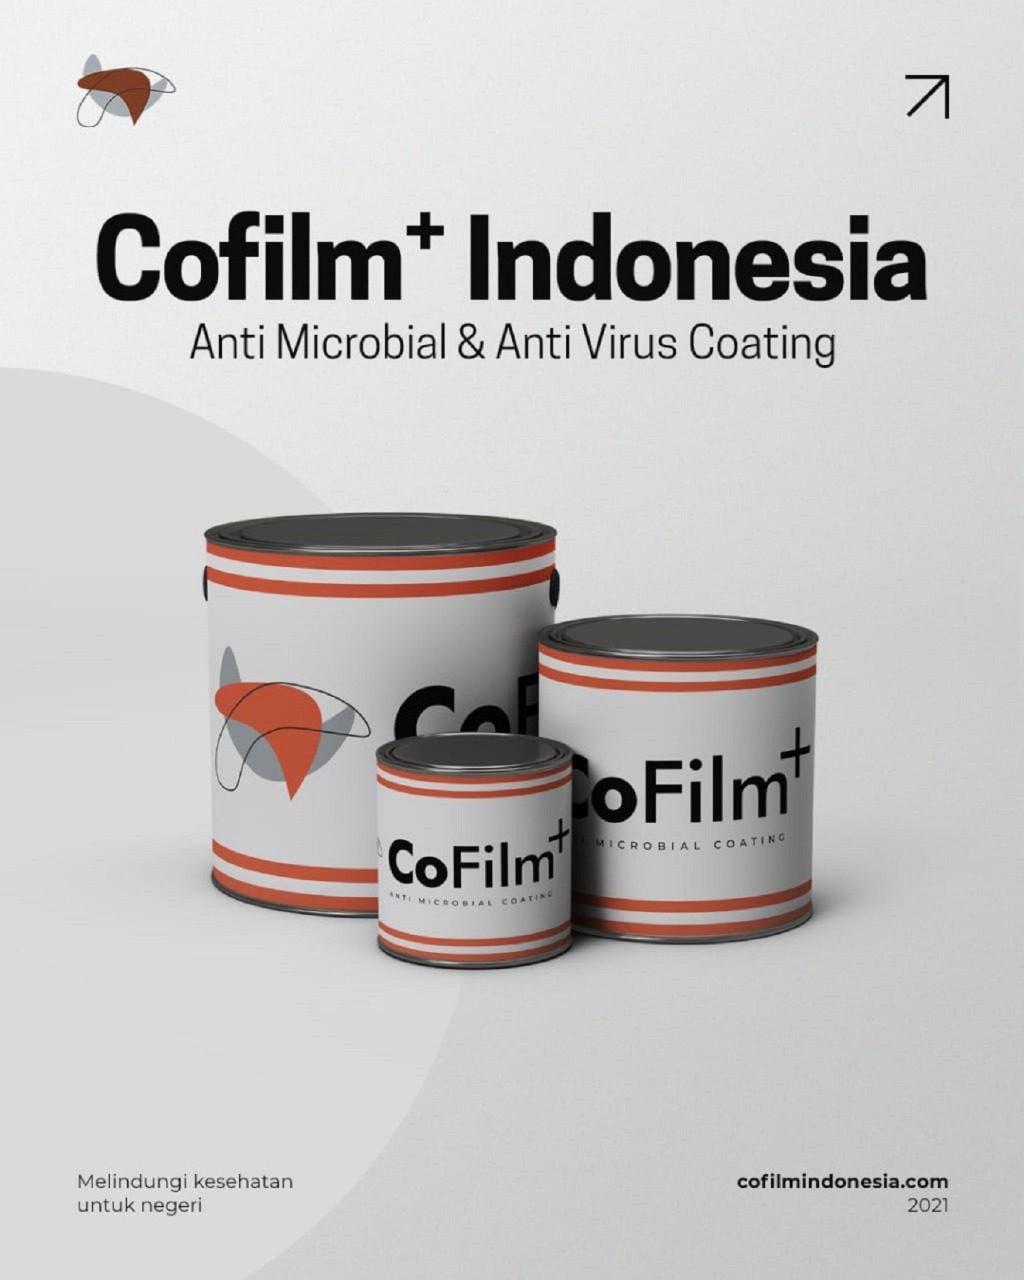 CoFilm, an antivirus permanent disinfectant technology created by ITS which received appreciation from the Provincial Government of East Java